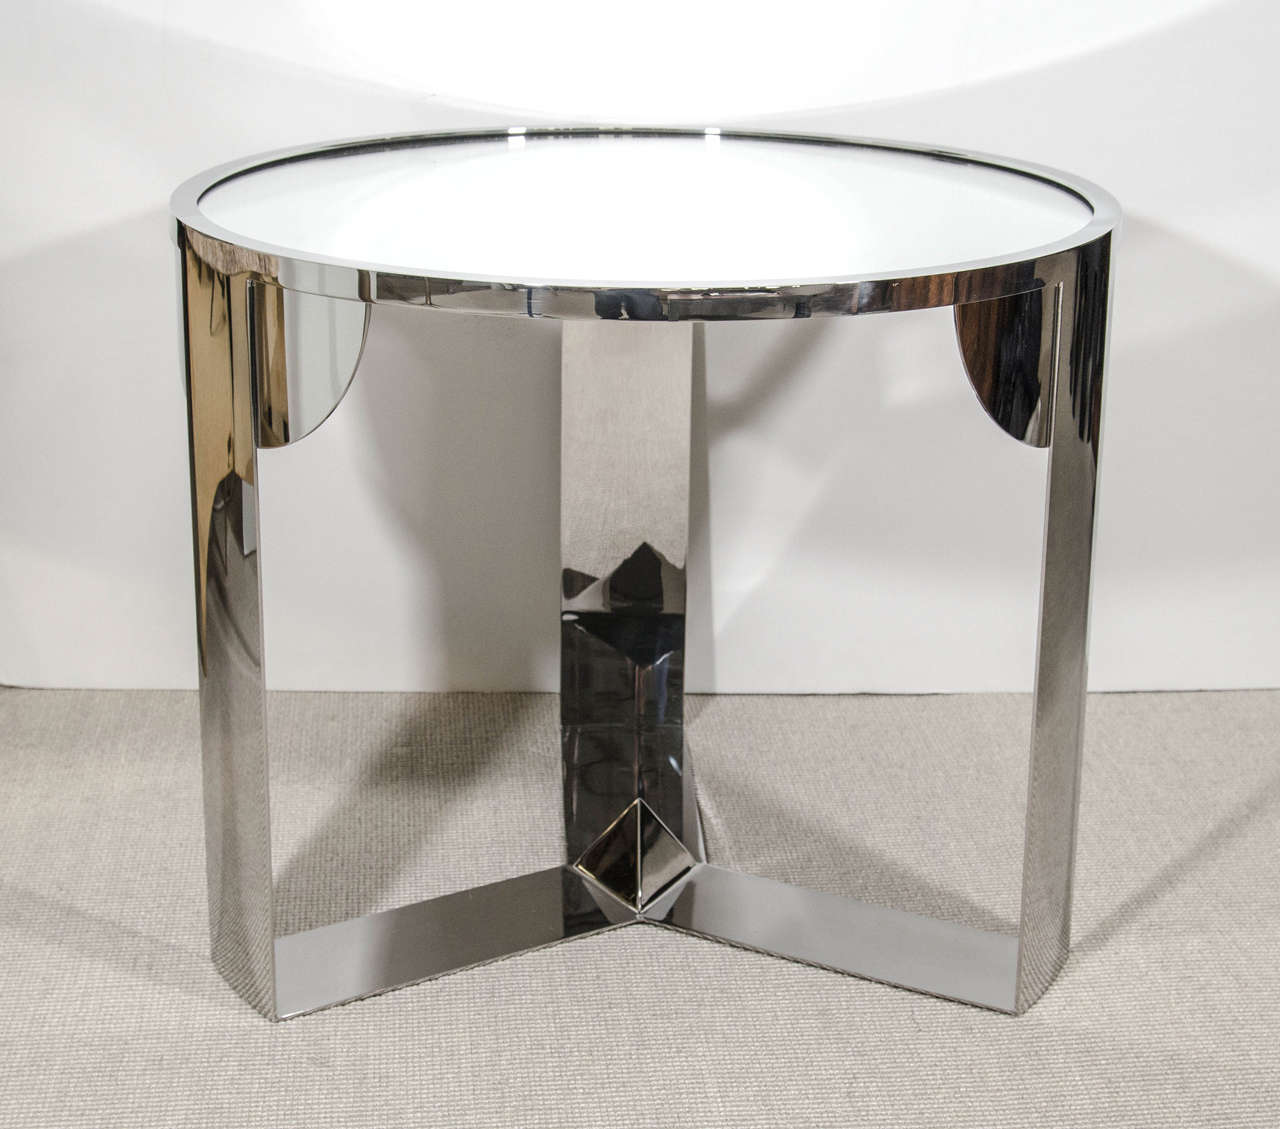 Limited edition constructivist inspired custom-made table by Eric Appel, USA.
Mirror top and polished stainless nickel finish base with pyramid design.

Other combinations available.